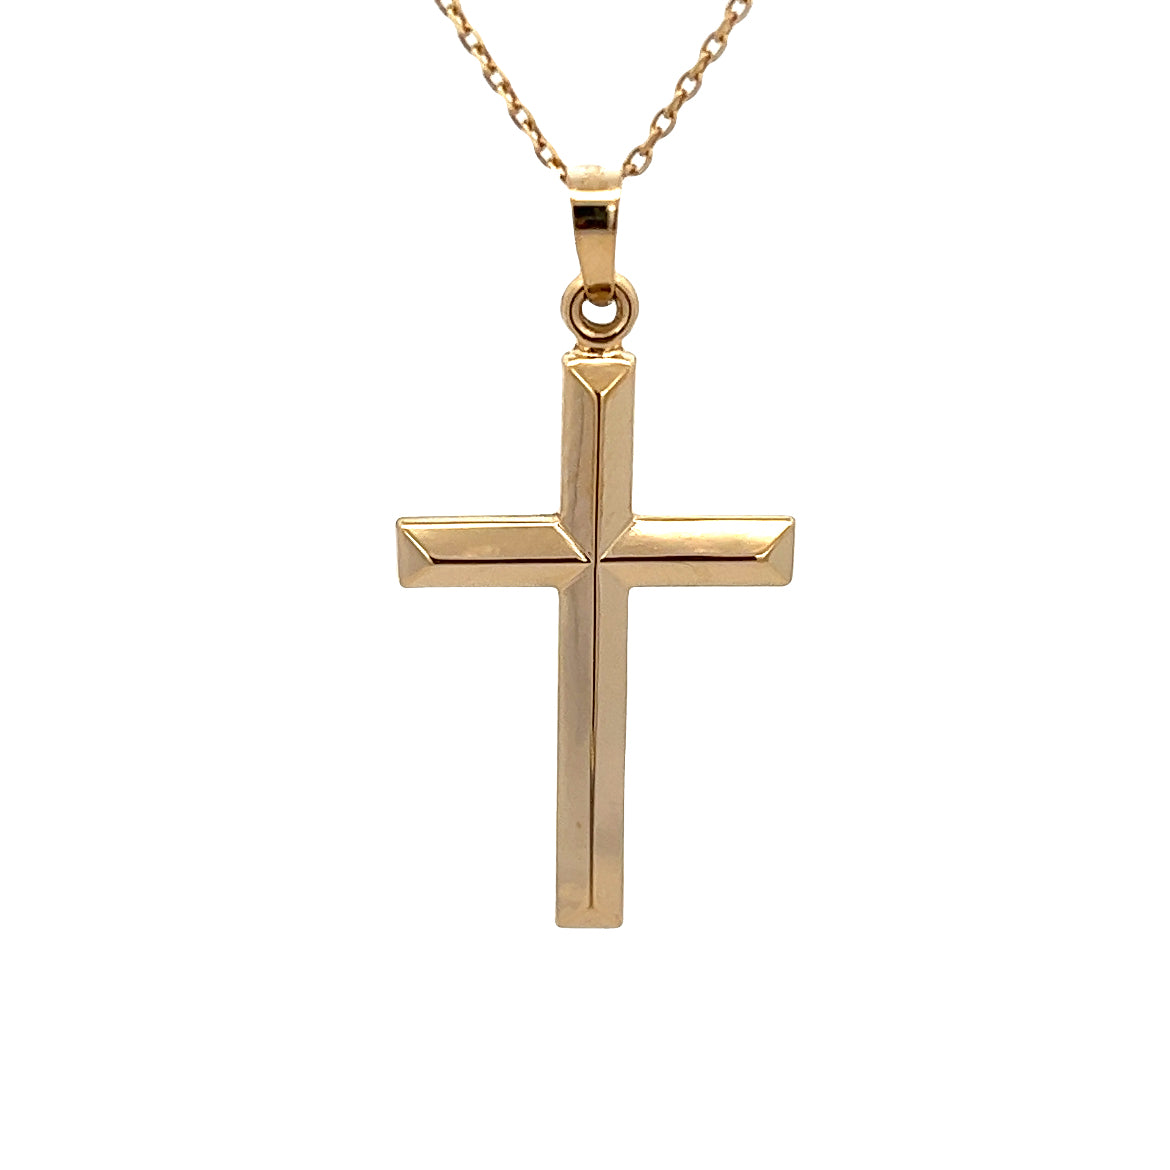 14K GOLD CROSS WITH RELIEFE